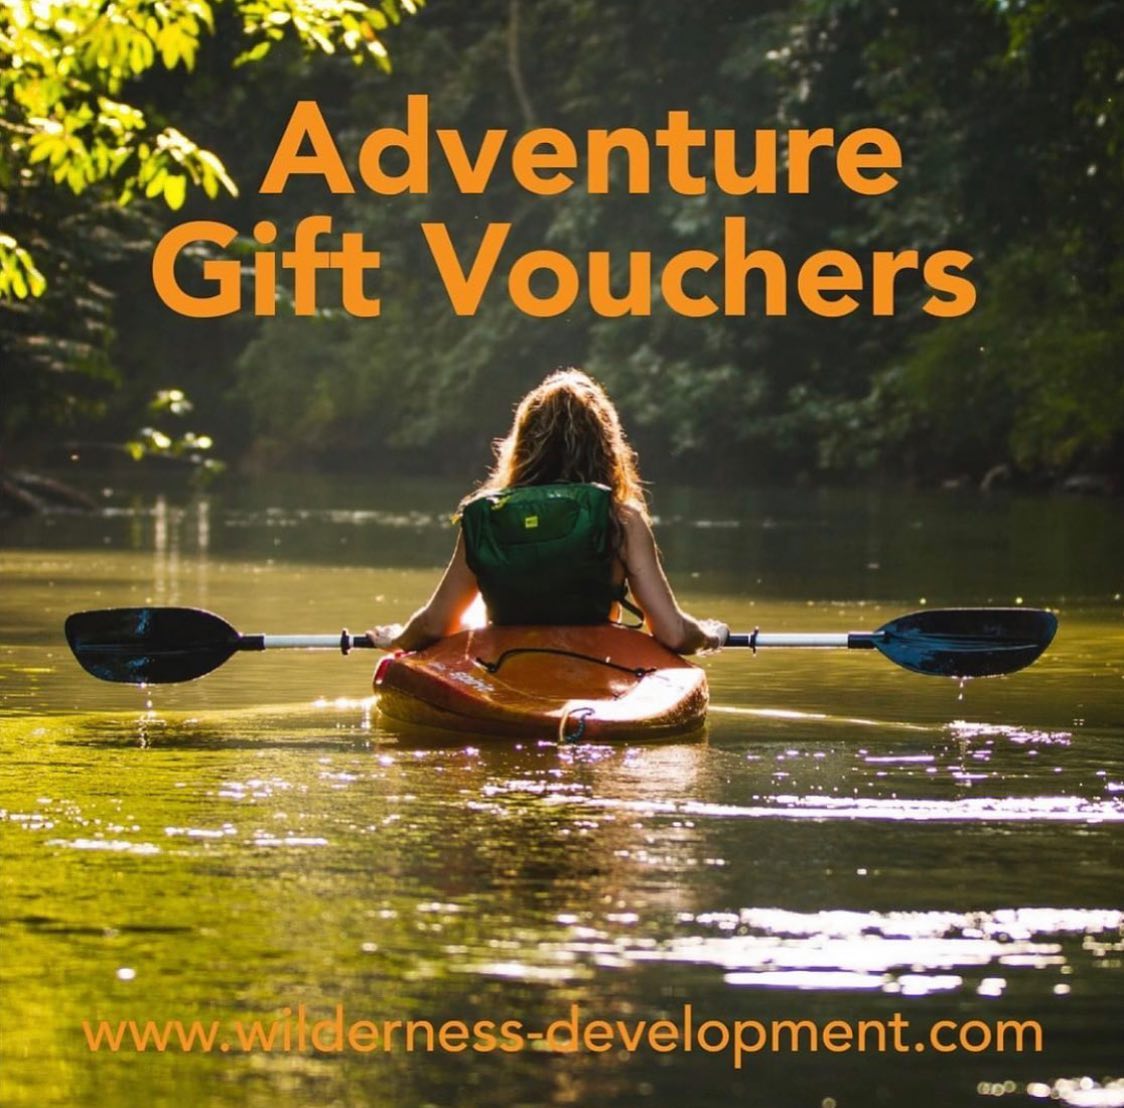 Stumped for that special gift? Check out our adventure gift vouchers! Link in bio for more information ⛰🥾⛰

https://www.wilderness-development.com/booking-information/online-booking/adventure-activity-gift-vouchers
.
.
.
#wildernessdevelopment #giftvoucher #giftvouchers #vouchers #gifts #experiencegifts #experiencegifting #trysomethingnew #trysomethingdifferent #outdooractivities #outdoorpursuits #adventures #adventuretime #experience #thegreatoutdoors #outdoortherapy #lifeofadventure #liveoutdoors